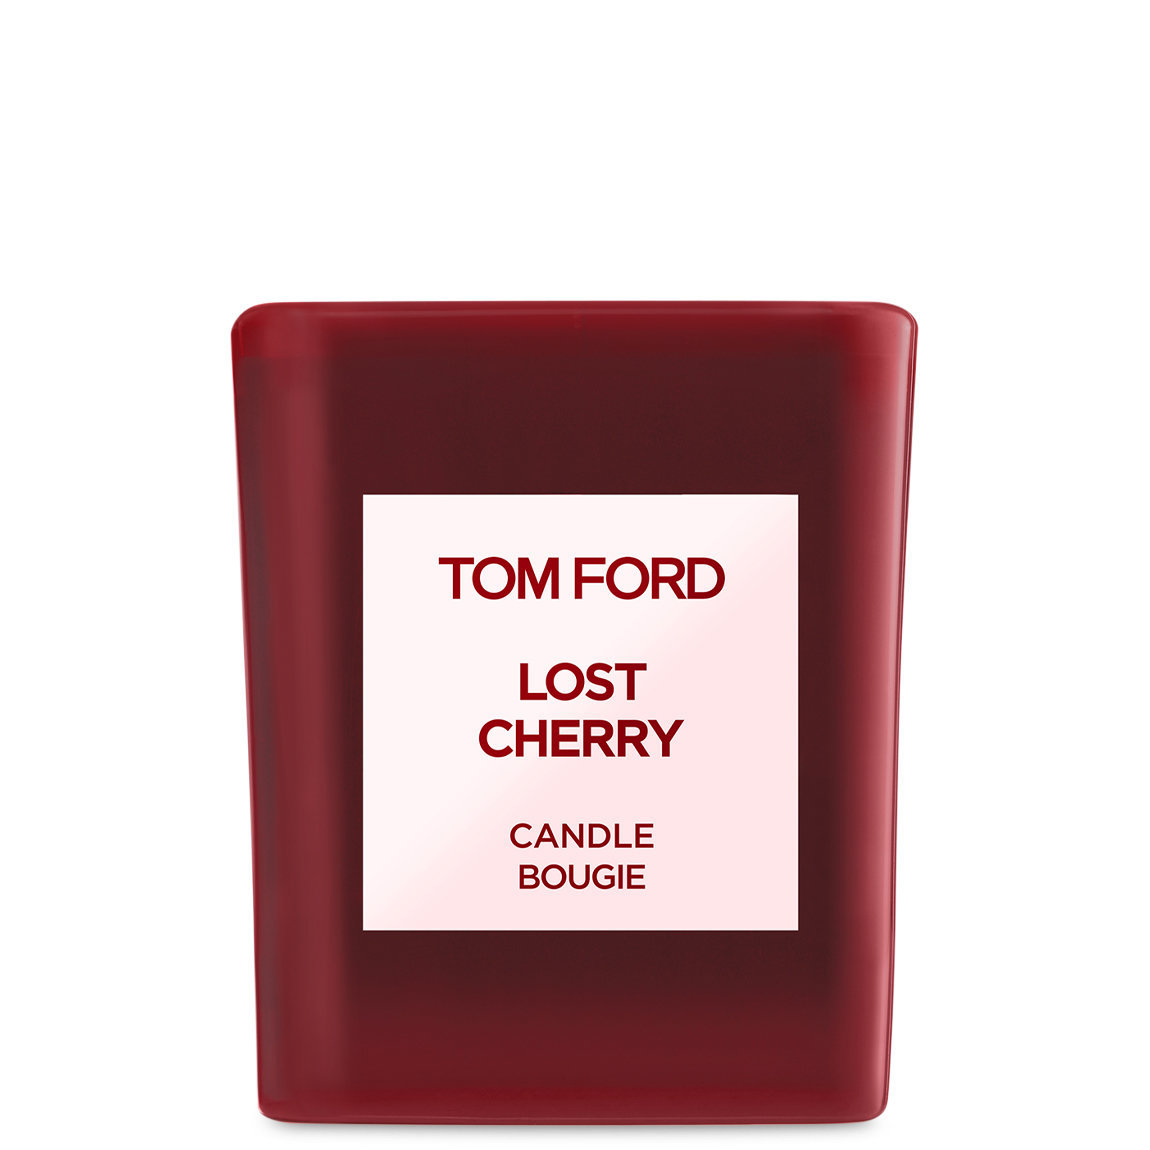 TOM FORD Lost Cherry Candle alternative view 1 - product swatch.